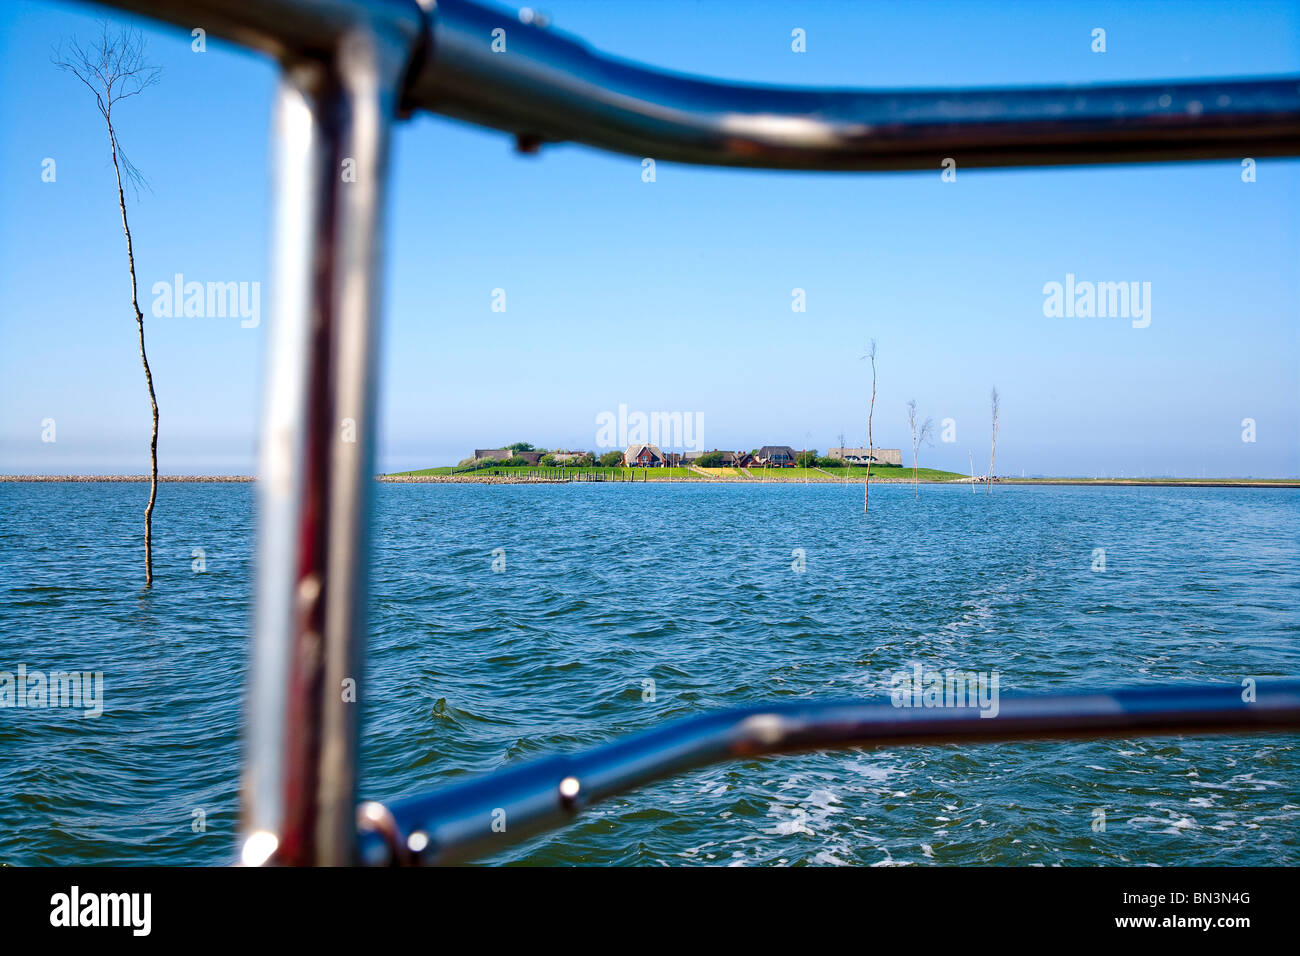 Hallig Oland seen from a boat, Nordfriesland, Schleswig-Holstein, Germany Stock Photo